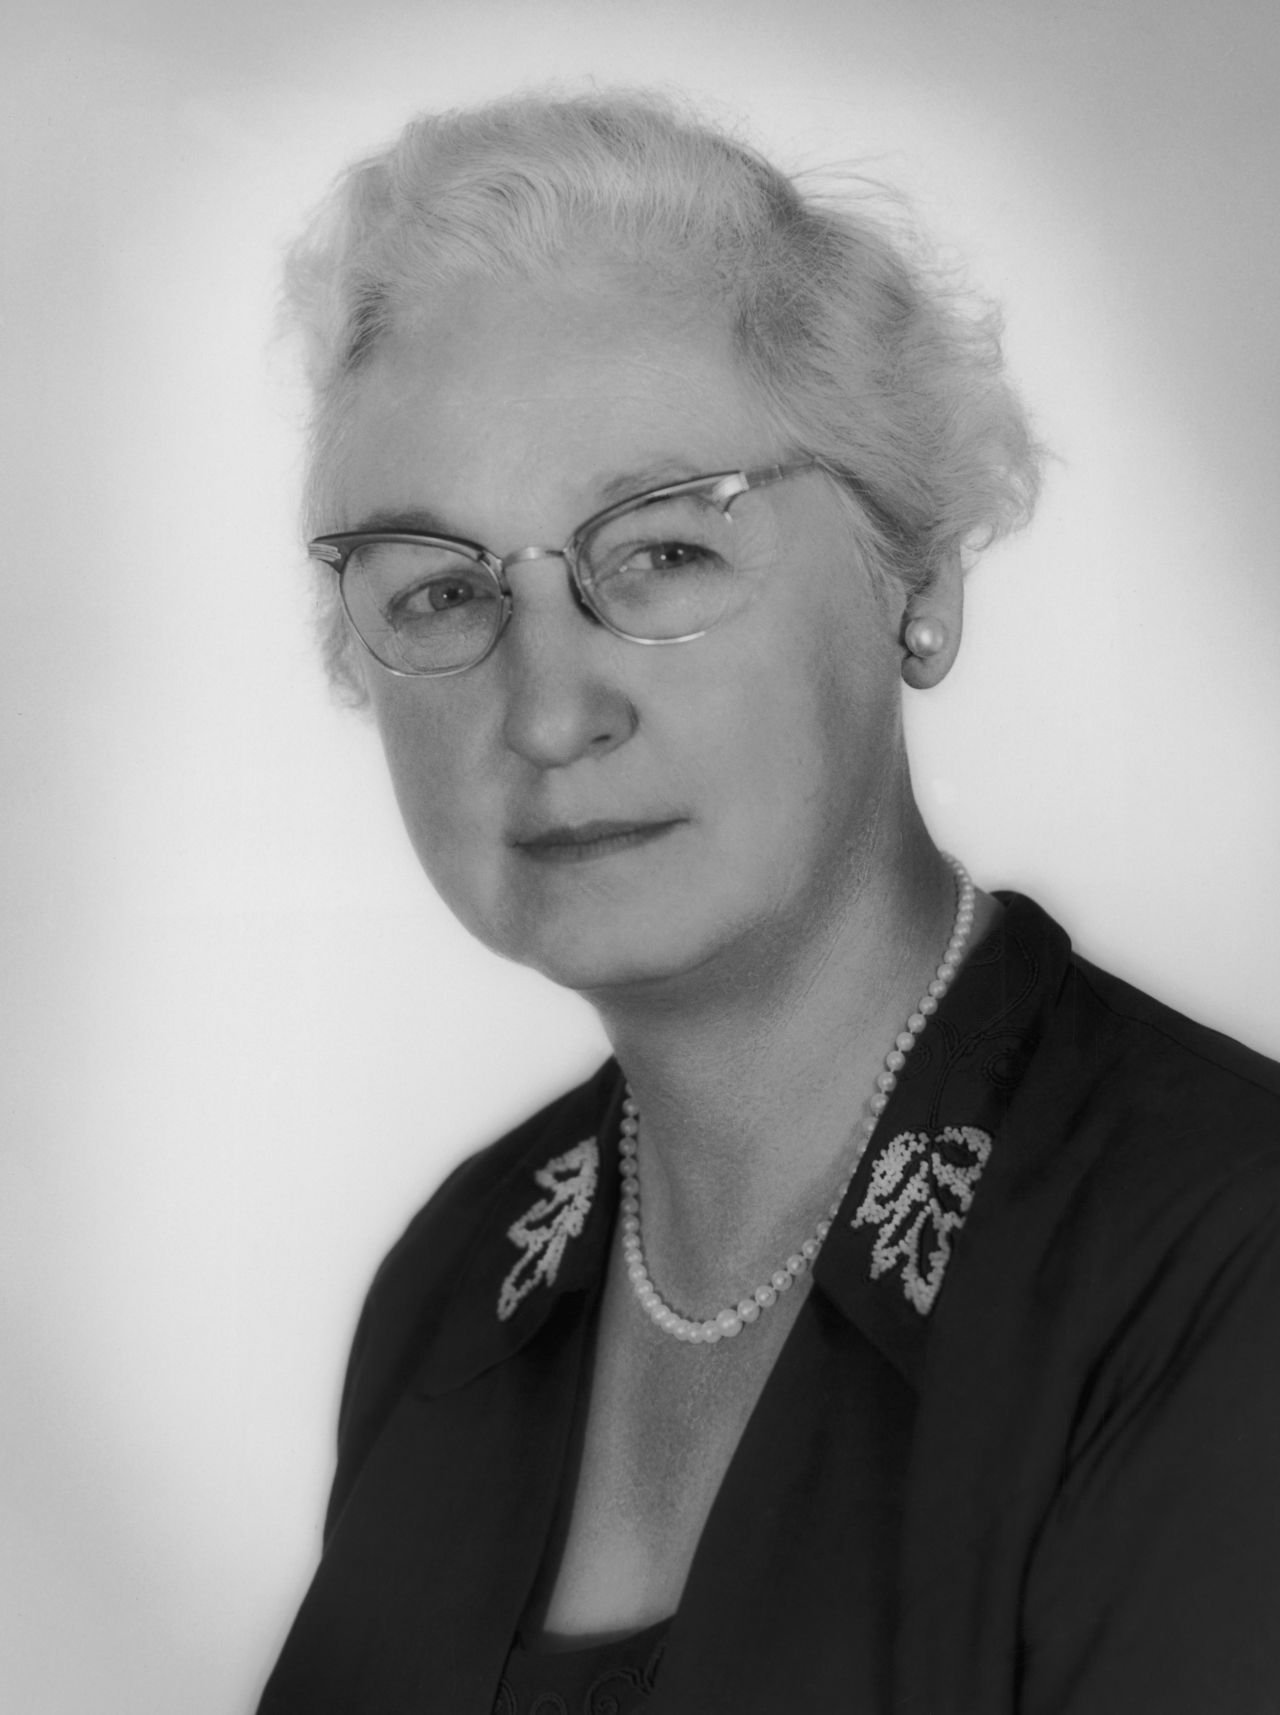 American doctor <a href="http://www.nlm.nih.gov/changingthefaceofmedicine/physicians/biography_12.html" target="_blank" target="_blank">Virginia Apgar</a> (1909-1974) developed the first system of tests, known as the Apgar score, to assess the health of newborn babies. She was also the first woman to be a full professor at the Columbia University College of Physicians and Surgeons.